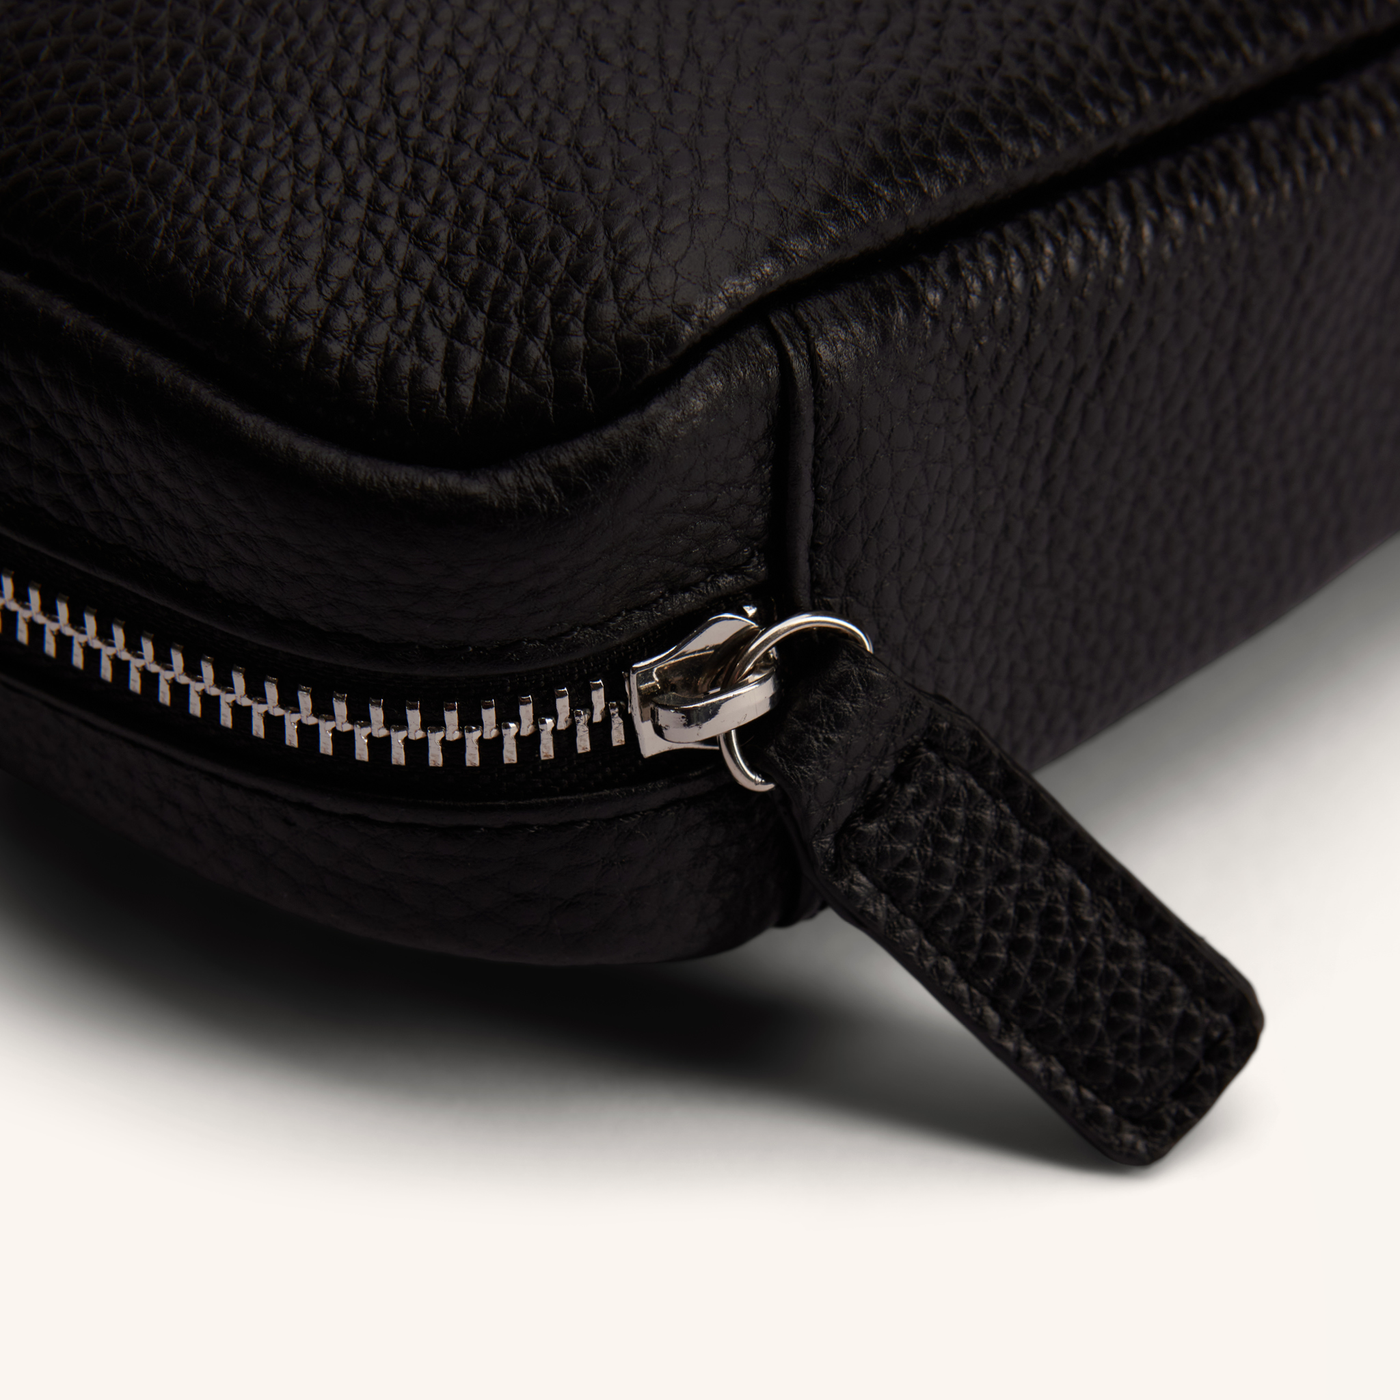 The Index Black Leather Travel Case